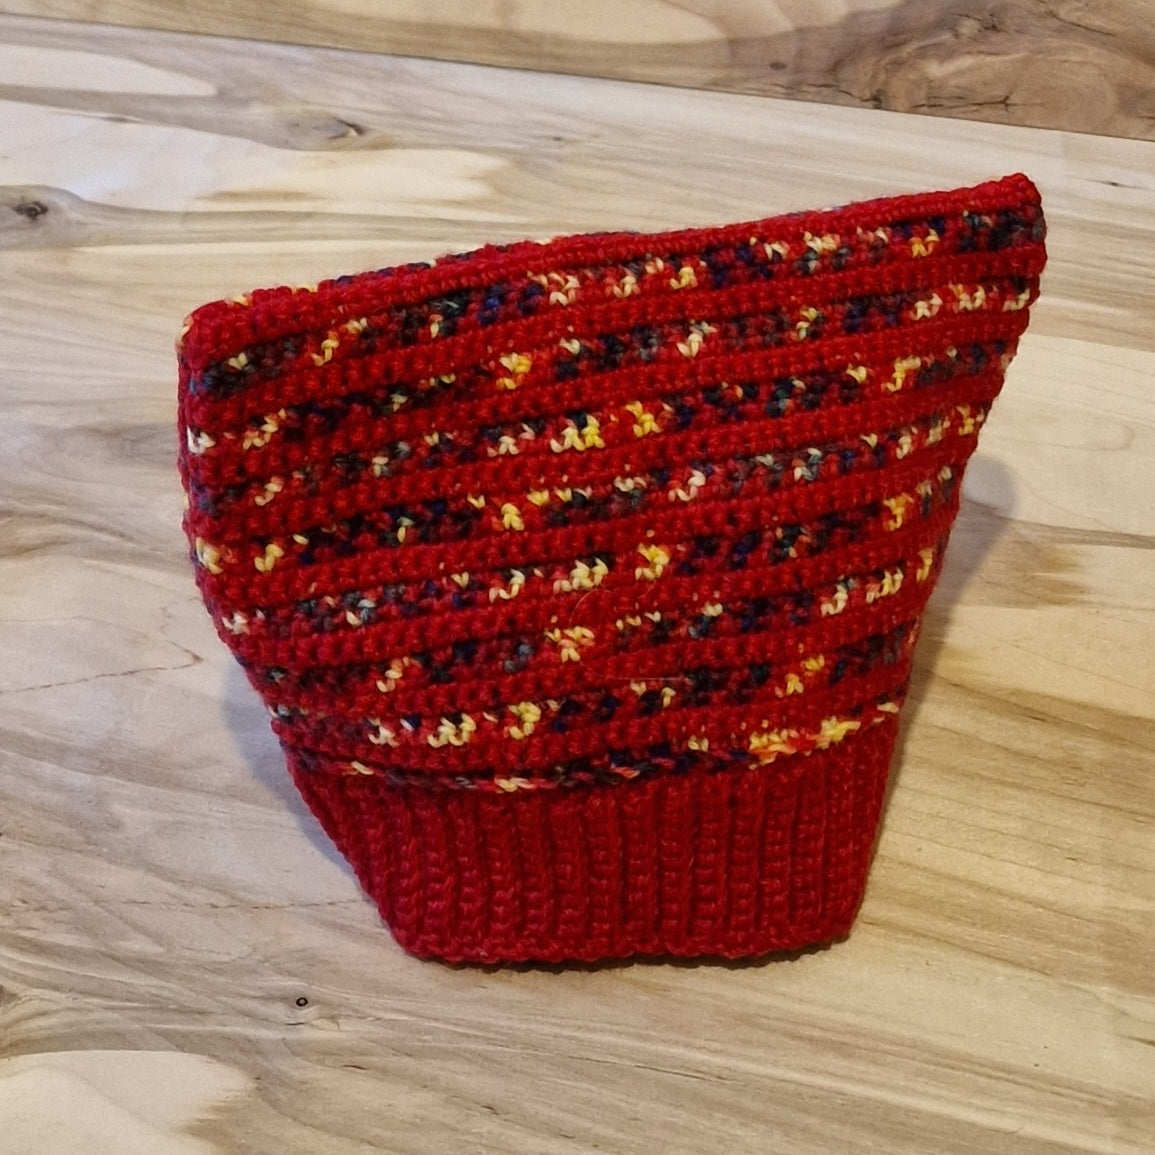 Red spotted knitted children's hat (ANST 21)